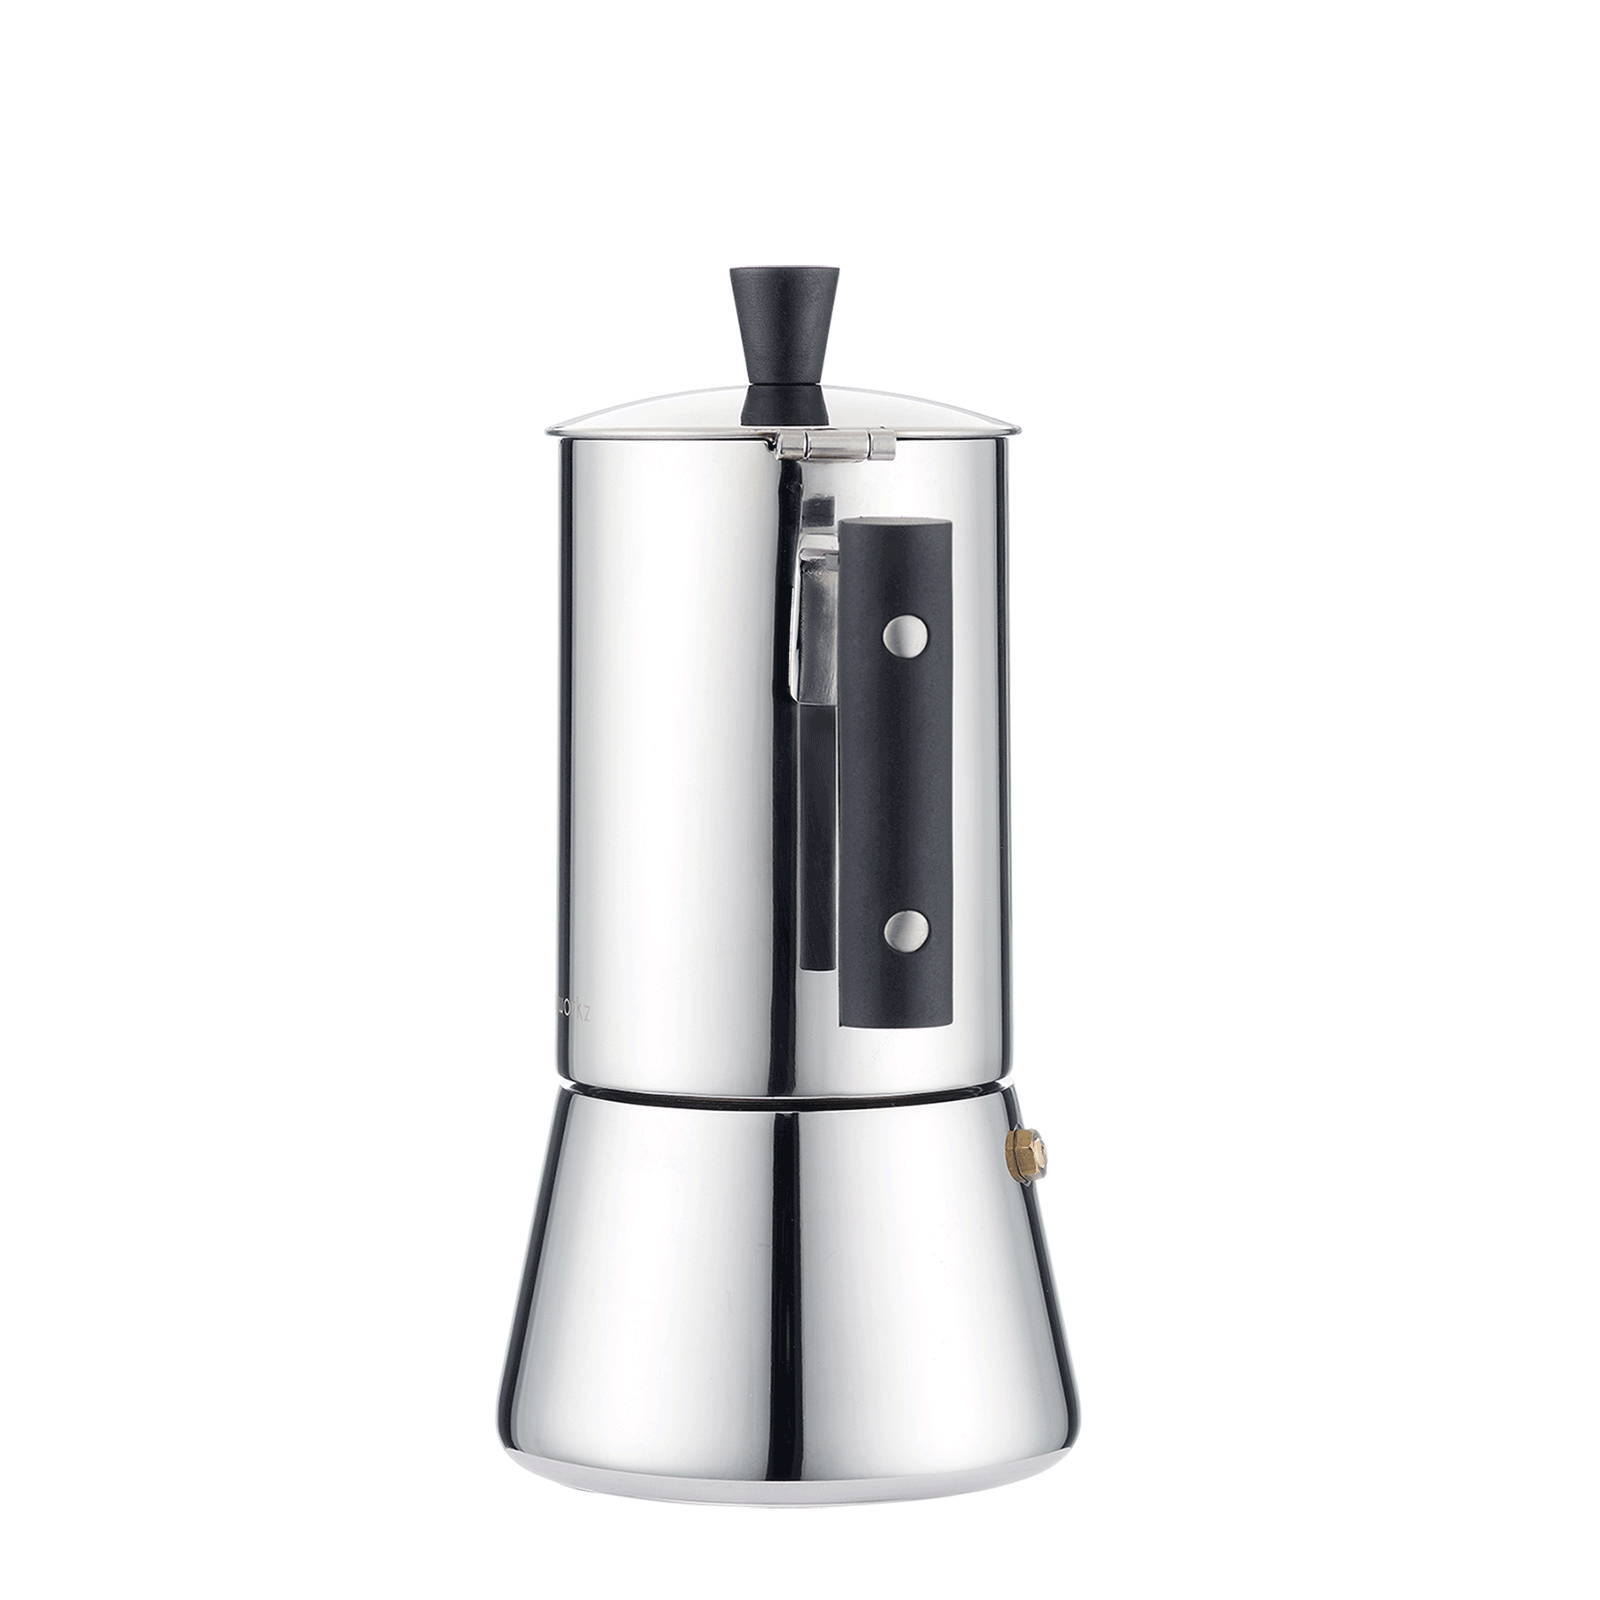 Induction Stainless Steel Italian Coffee Machine Maker 4cup 6.8 Oz